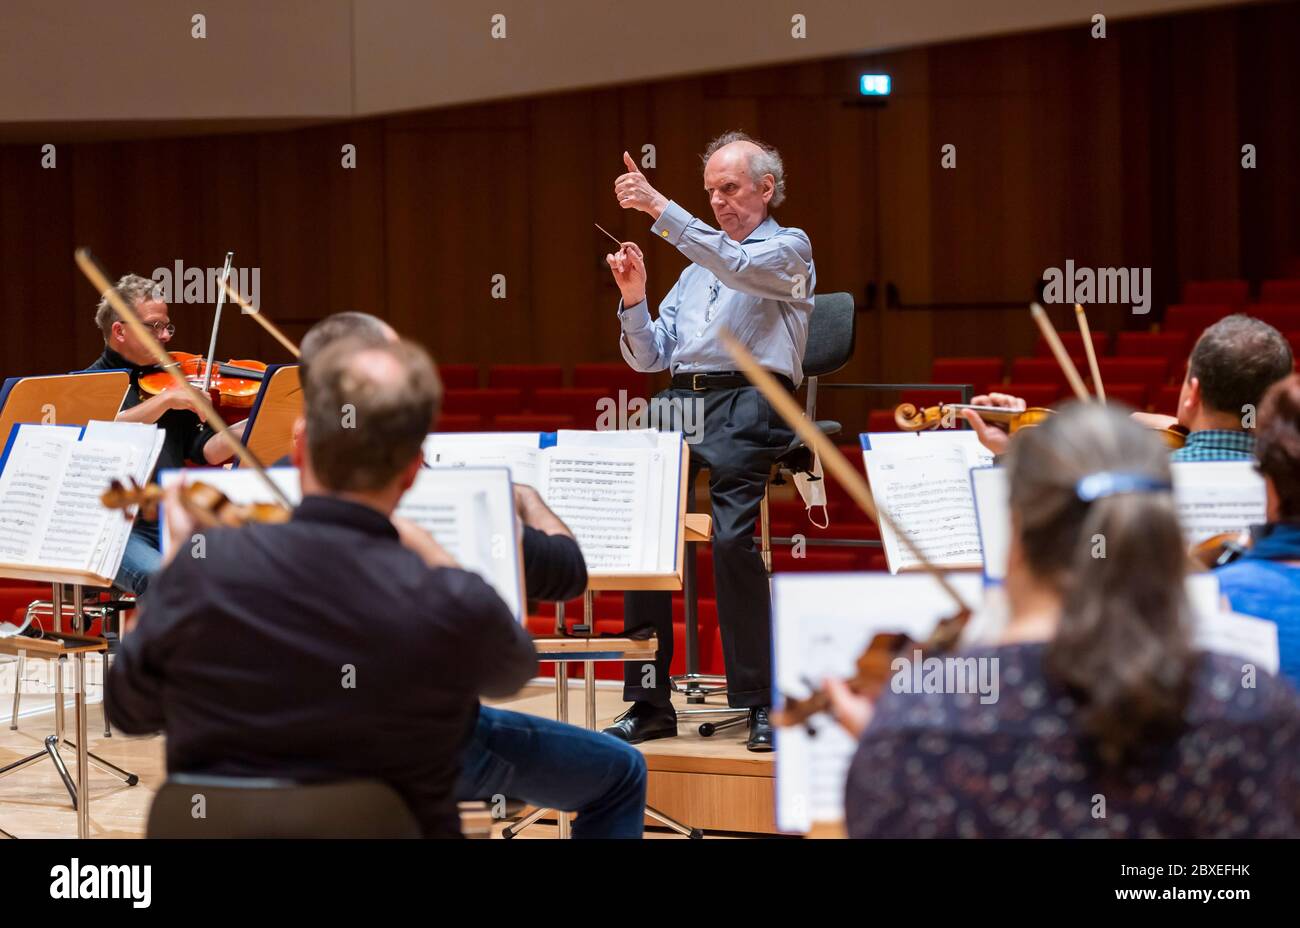 Dresden, Germany. 05th June, 2020. Chief conductor Marek Janowski rehearses with the musicians of the Dresden Philharmonic Orchestra in the concert hall of the Dresden Palace of Culture. On June 18th, the orchestra will play a concert with an audience in the Kulturpalast for the first time after a break due to corona. Credit: Matthias Rietschel/dpa-Zentralbild/dpa/Alamy Live News Stock Photo